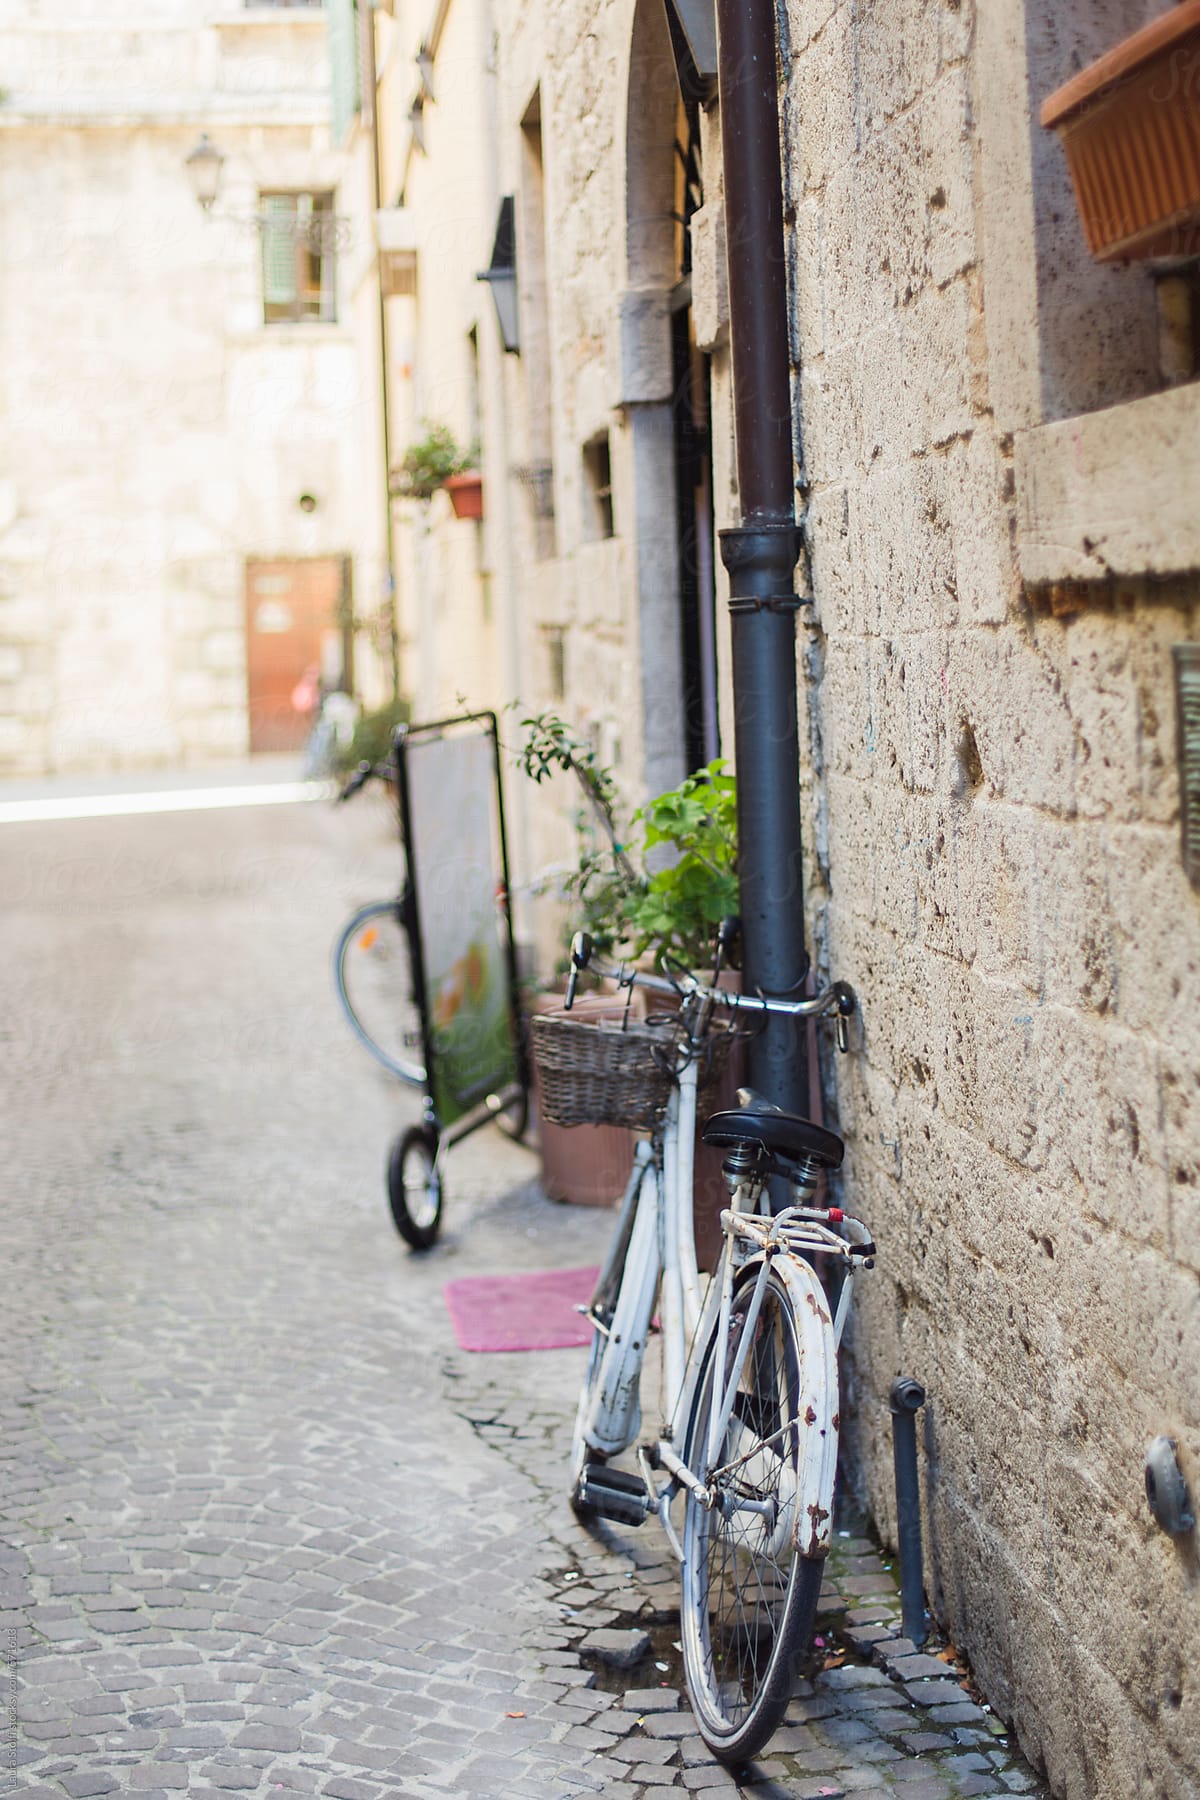 Old-fashioned bike parked close to ancient stone building in Ascoli Piceno, Italy